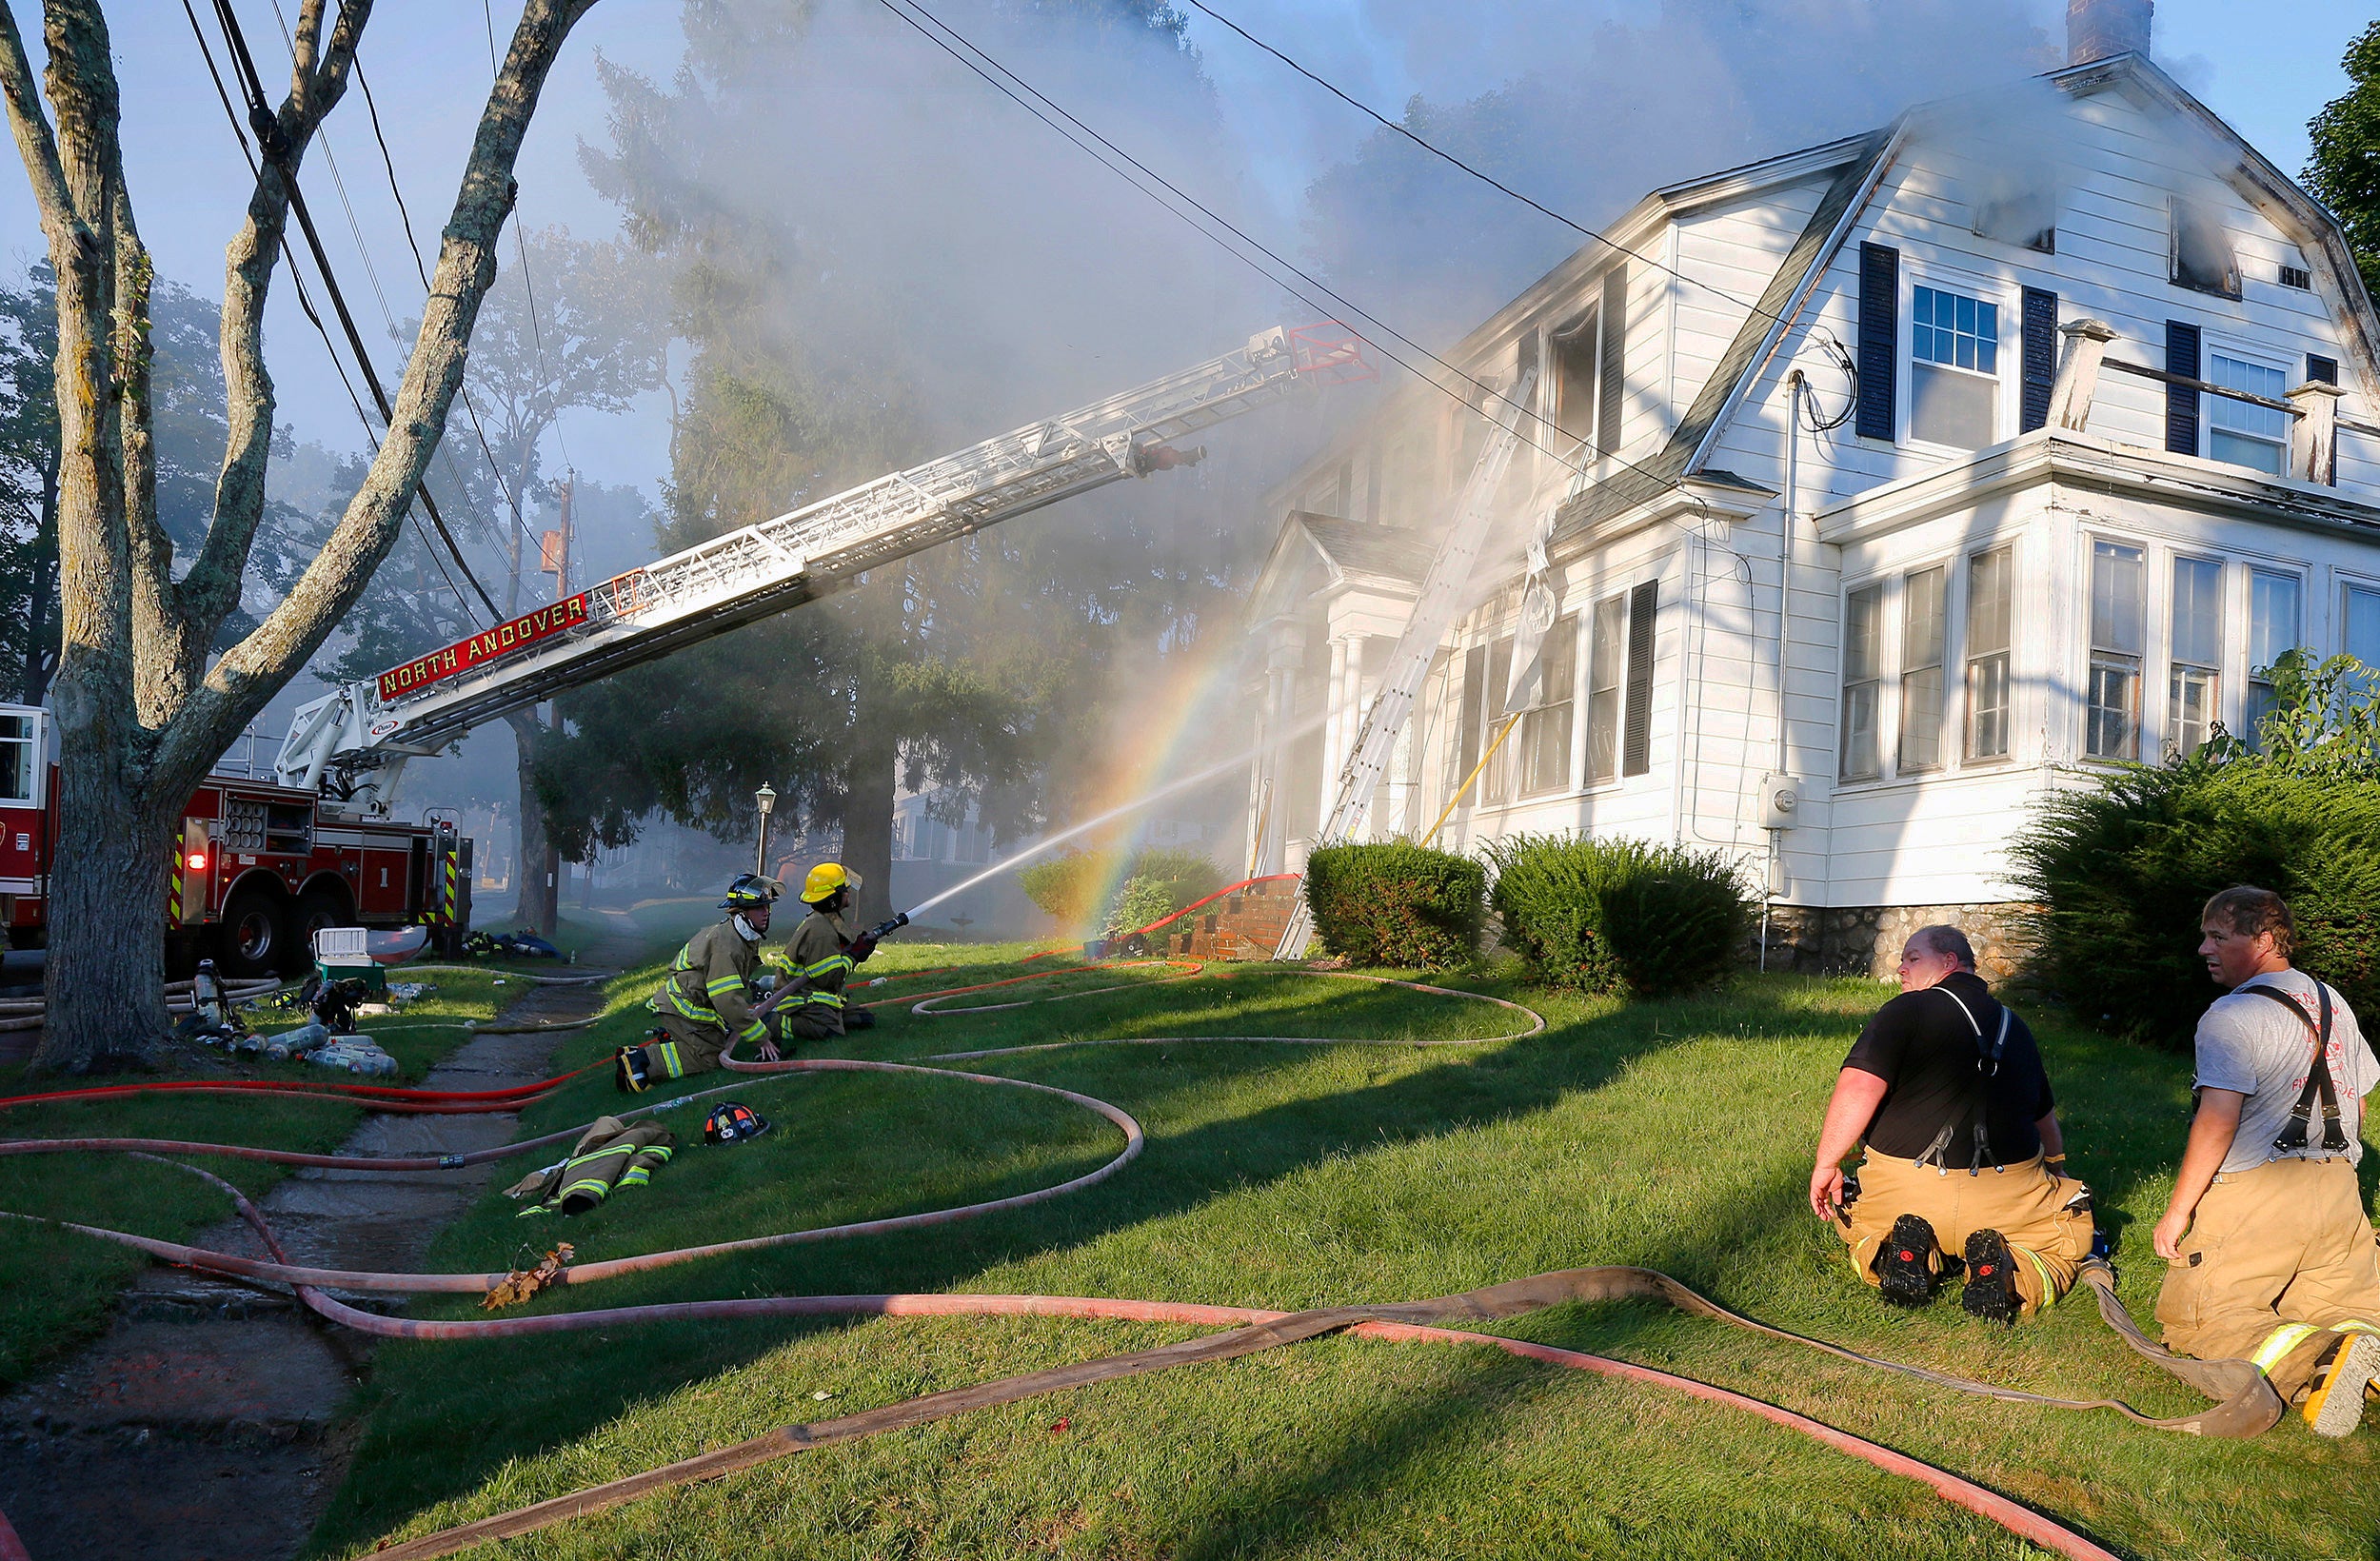 Firefighters battle a house fire on Herrick Road in North Andover, Mass.